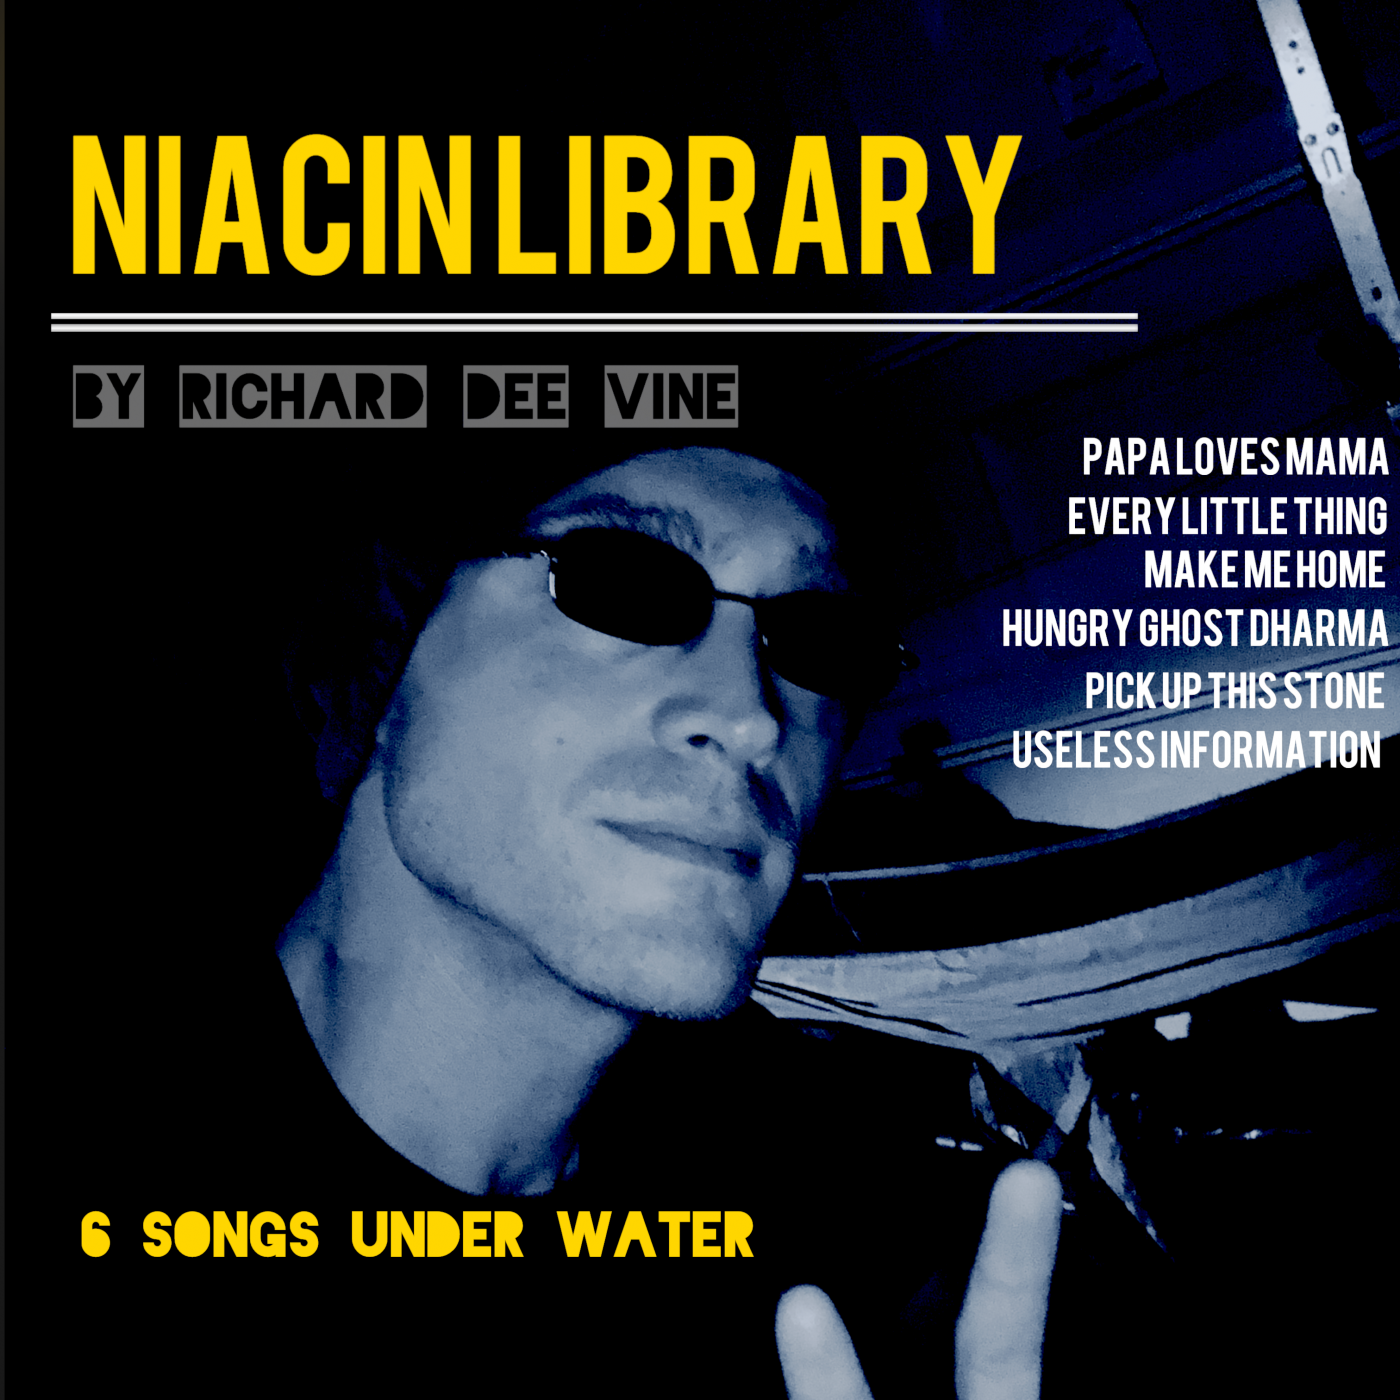 Niacin Library sheds new light on his seminal album ‘6 Songs Under Water’